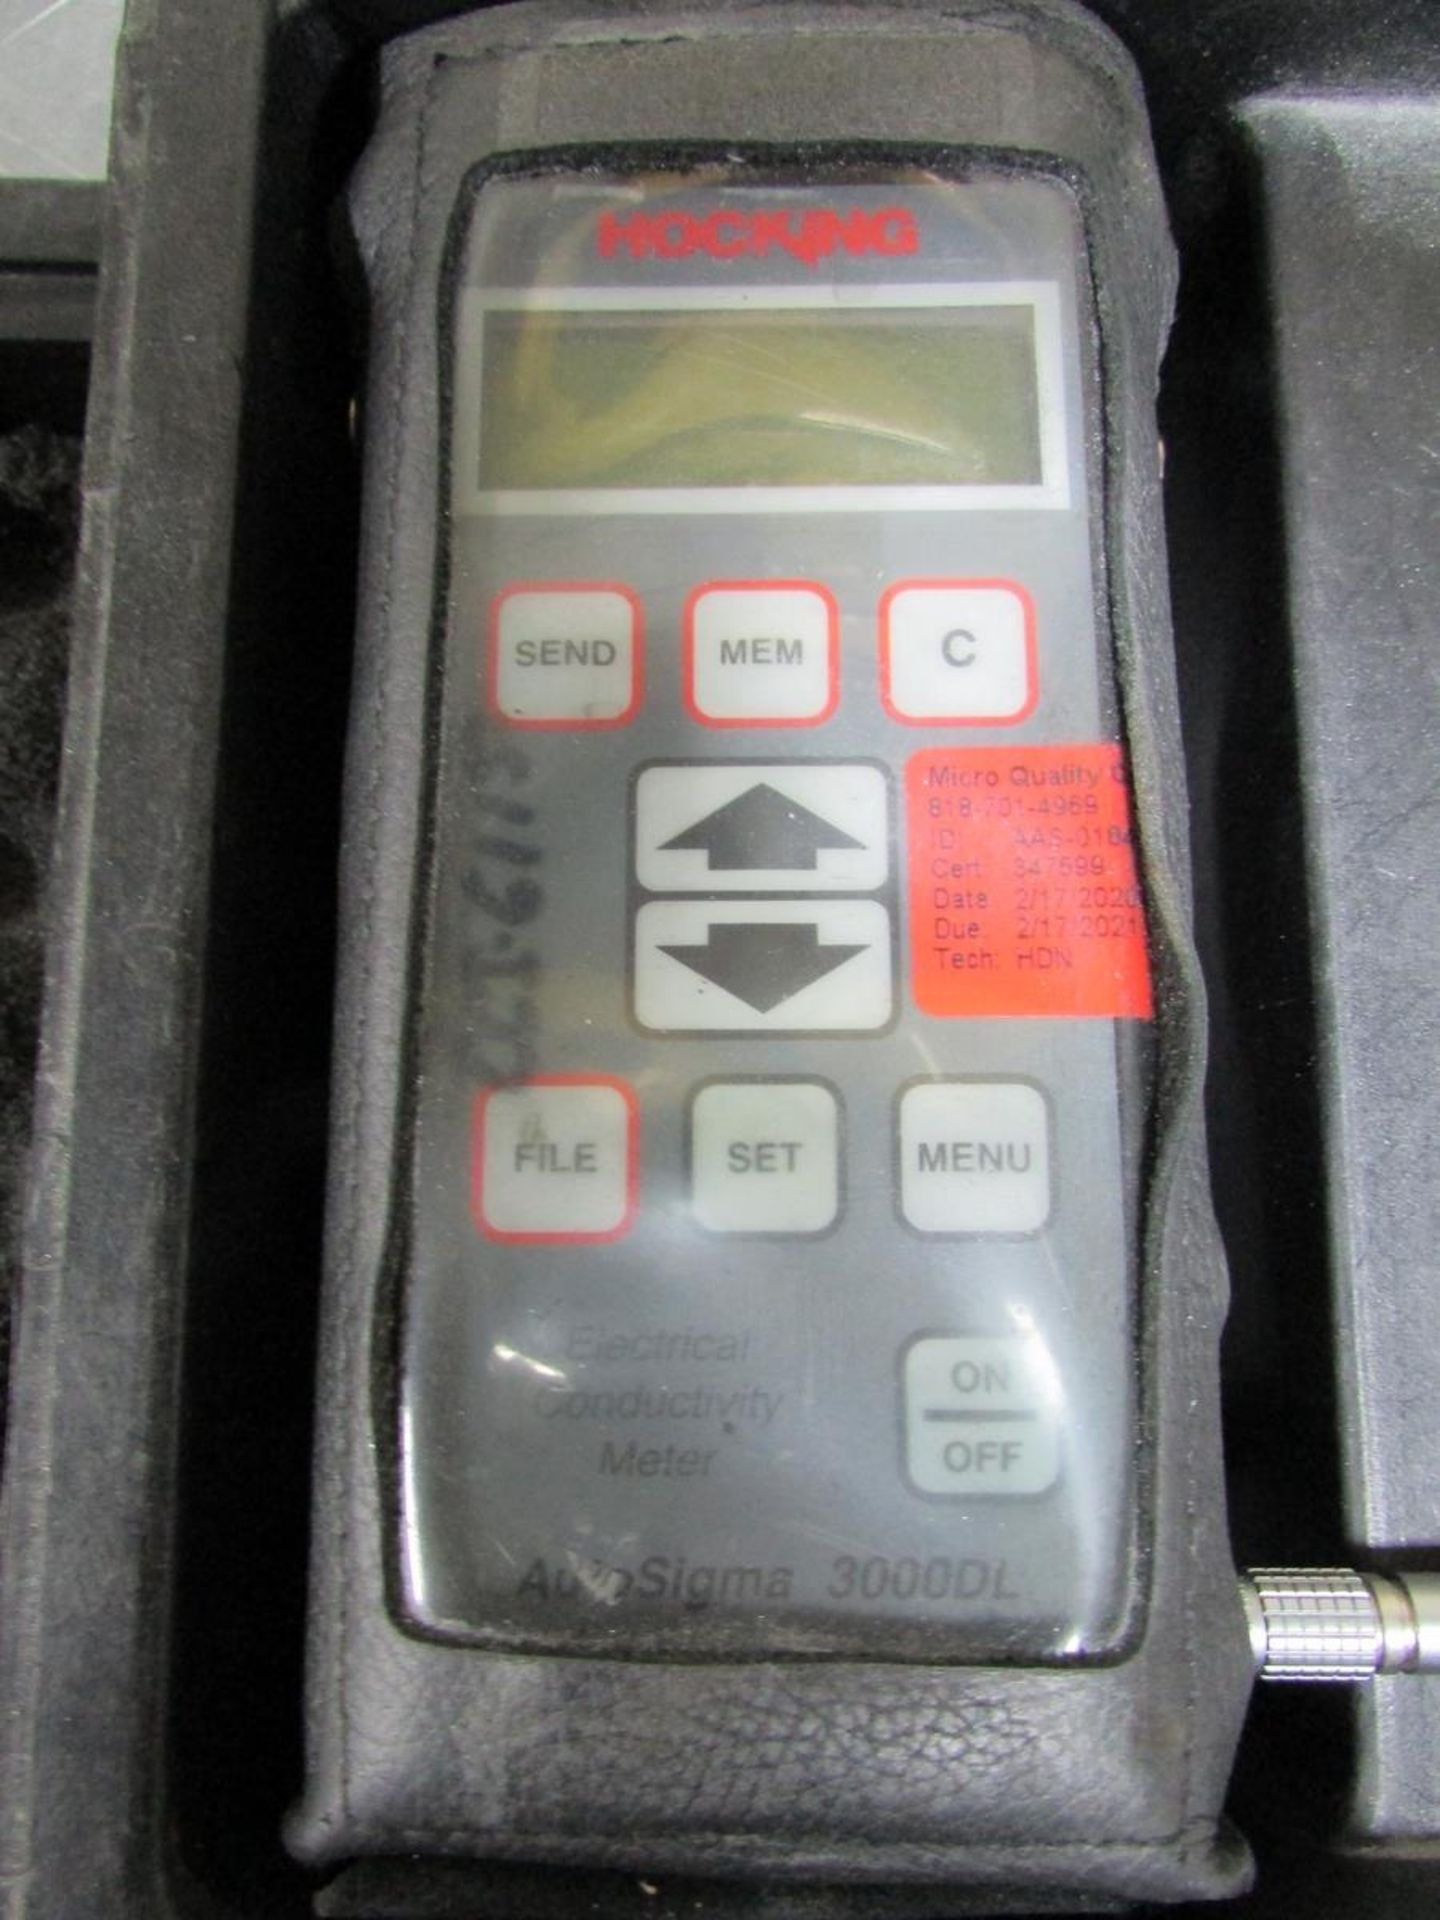 LOT - (3) HOCKING ELECTRICAL CONDUCTIVITY METERS, MODEL AUTOSIGMA 3000DL - Image 5 of 5